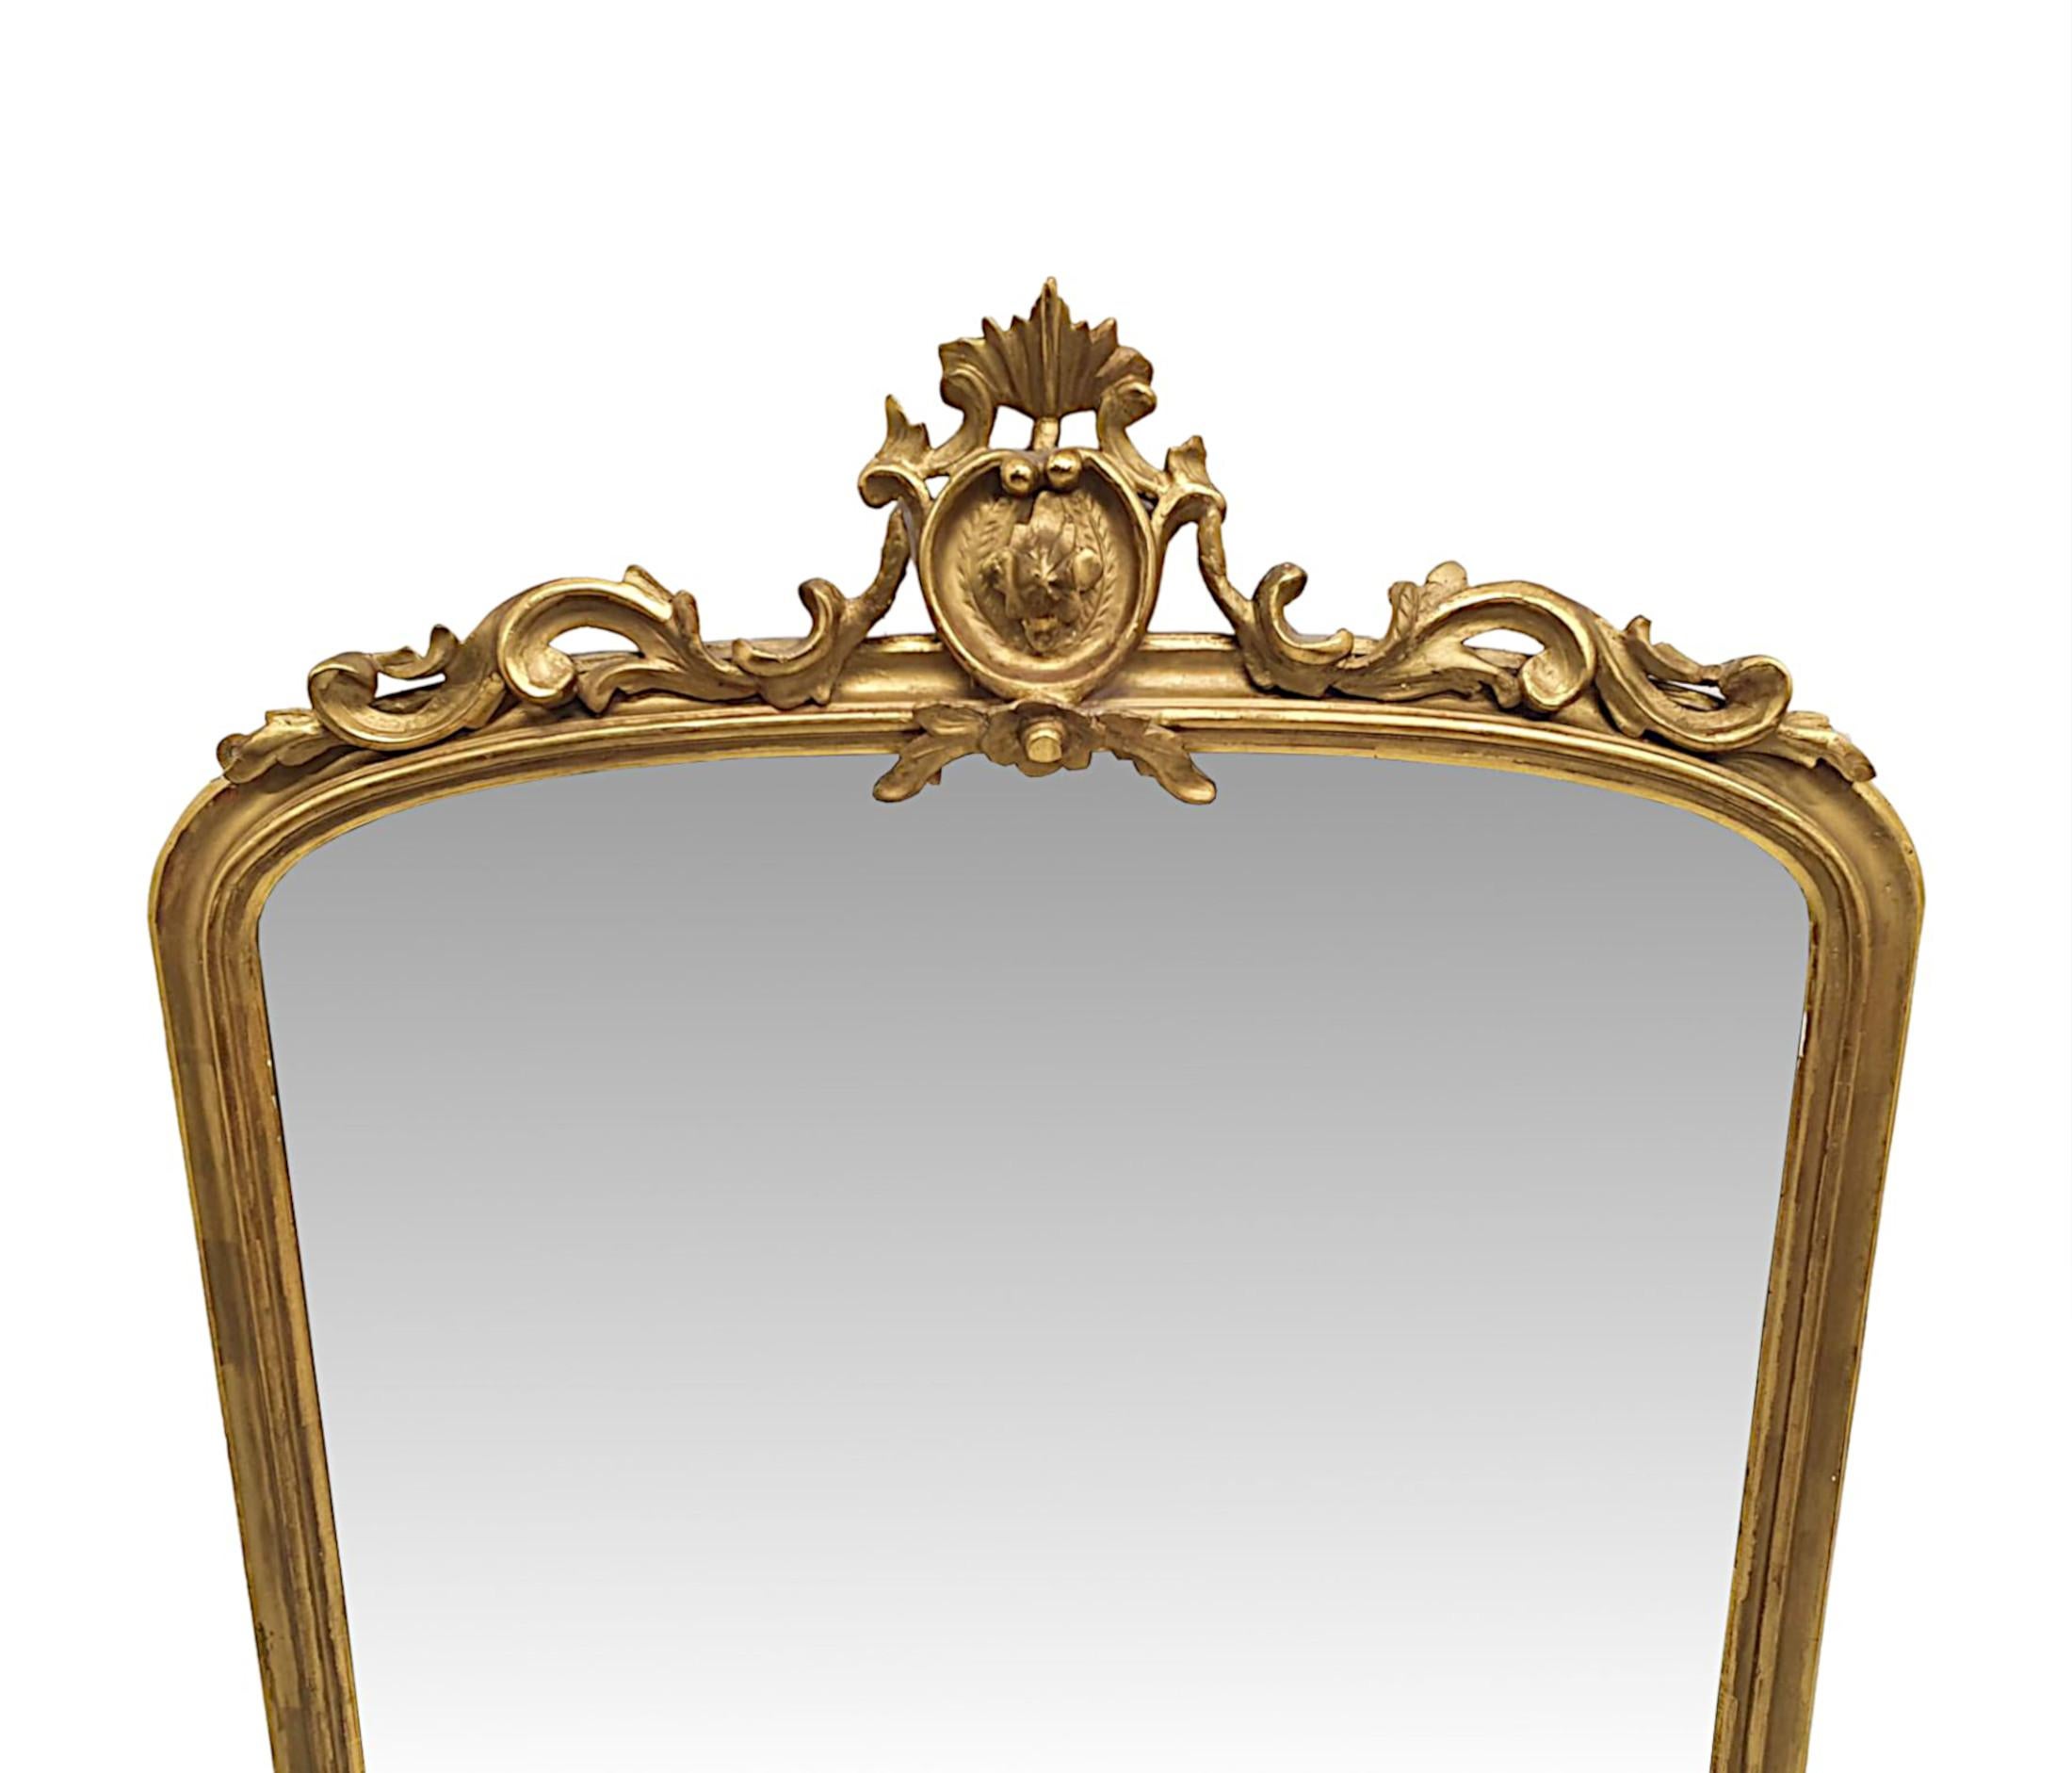 A fabulous 19th century giltwood overmantle mirror. The mirror glass plate of arch top form is set within a stunningly hand carved, moulded and pierced giltwood frame, surmounted with an elegantly ornate, centred crest composition comprising of